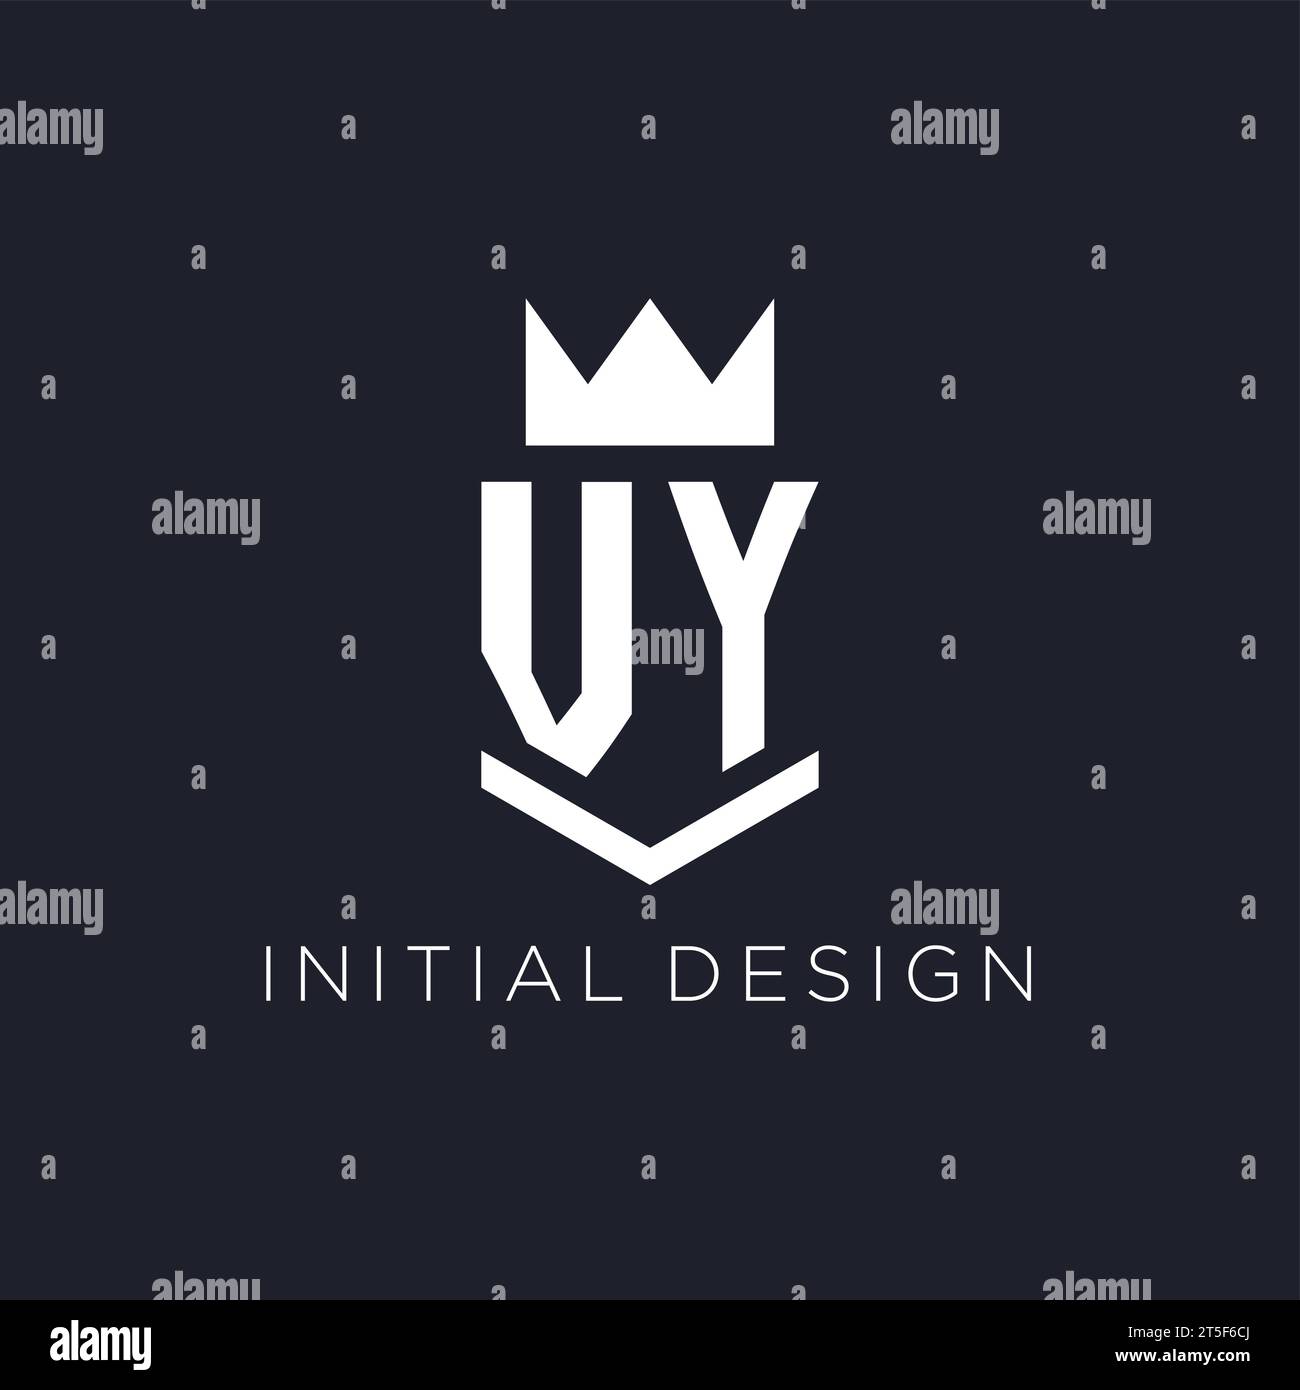 VY logo with shield and crown, initial monogram logo design ideas Stock Vector